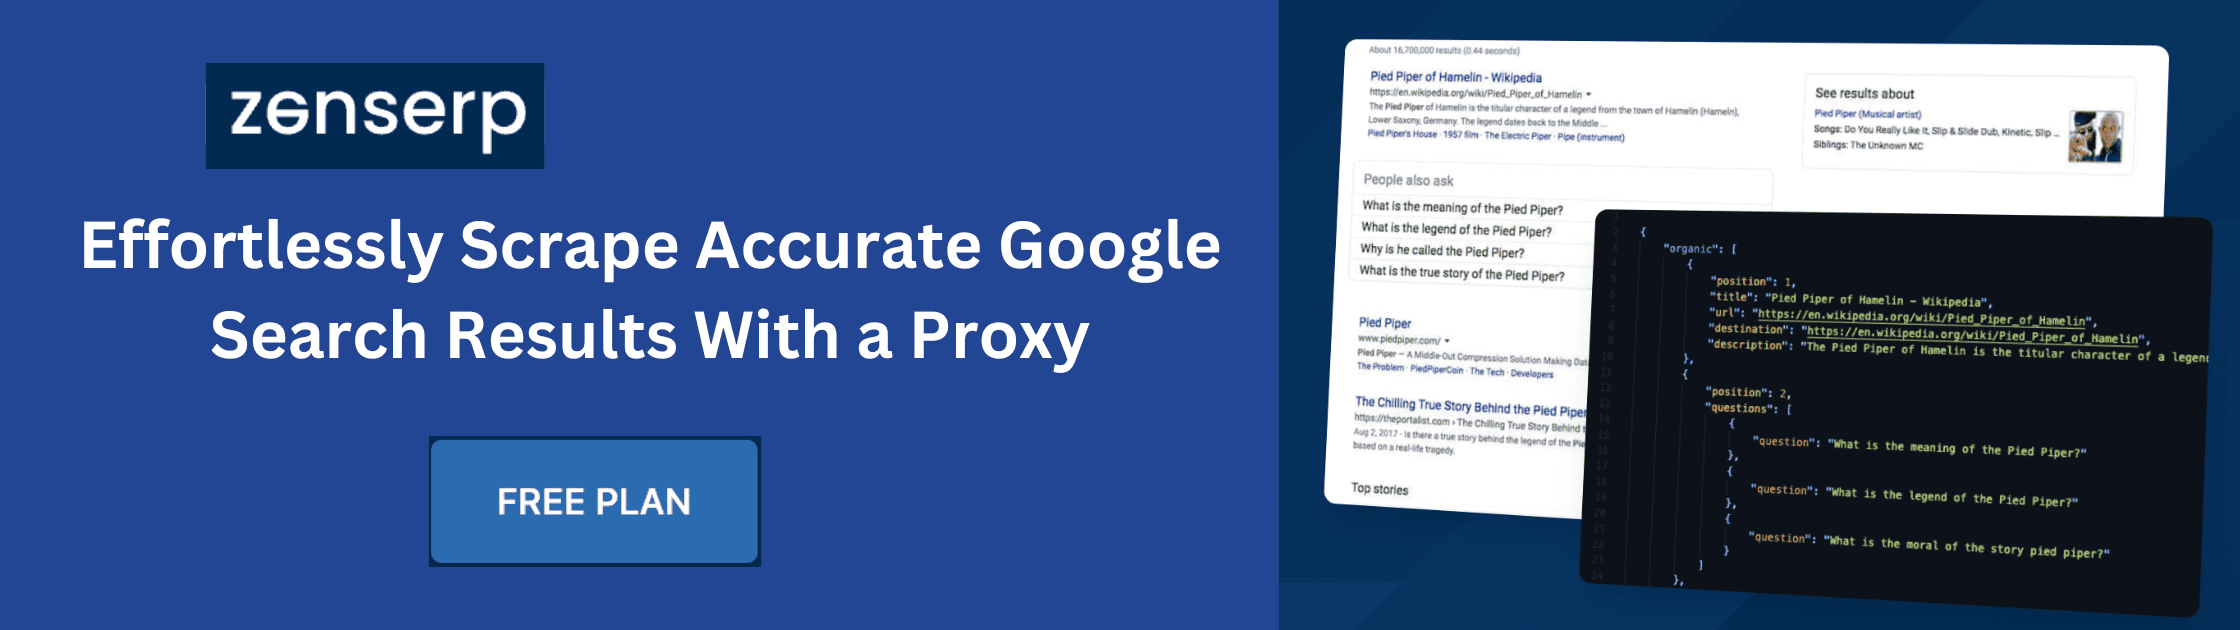 CTA - Effortlessly Scrape Accurate Google Search Results With a Proxy